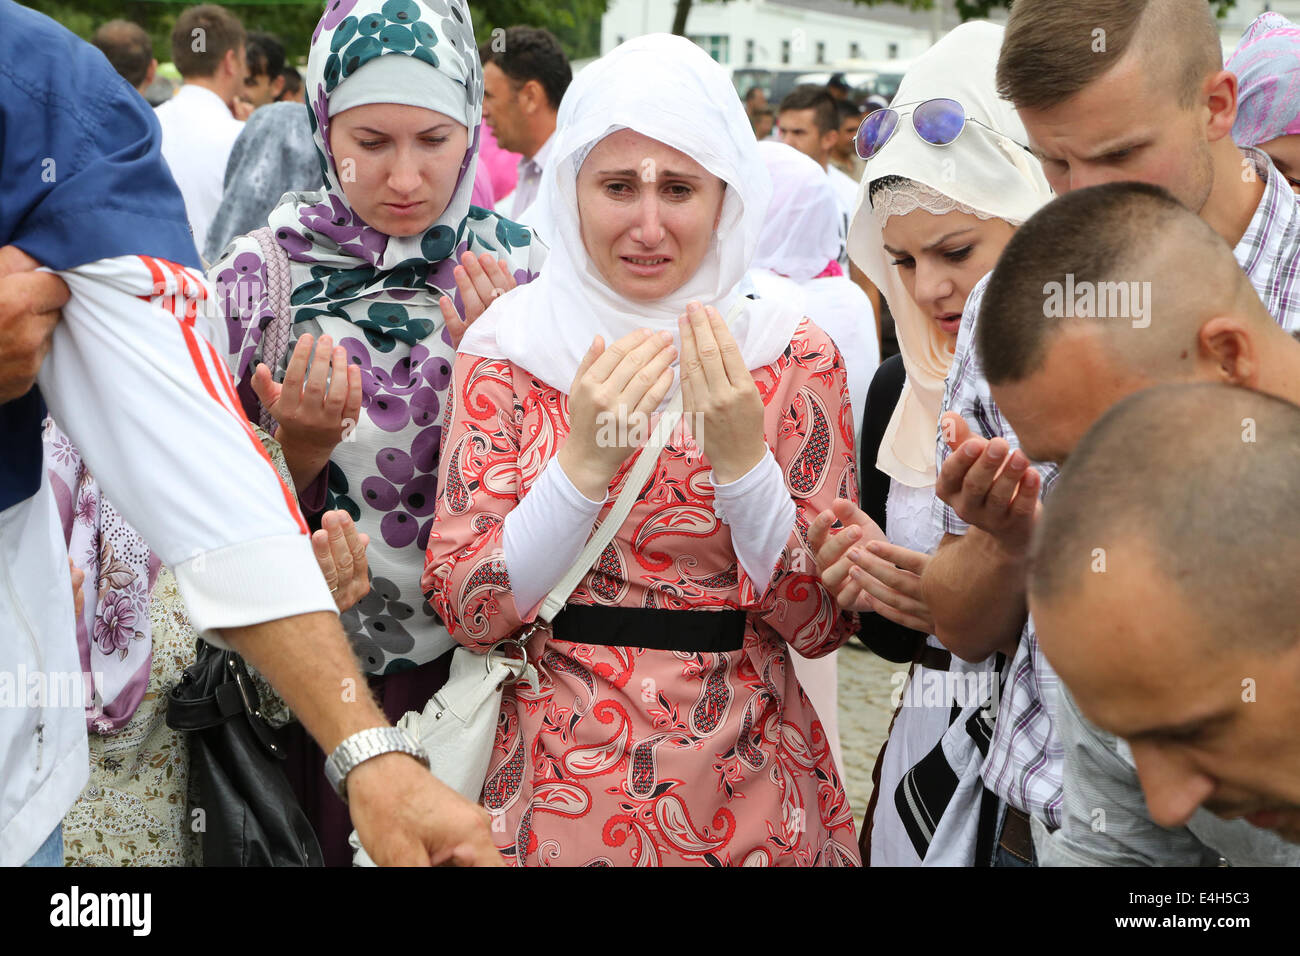 (140712) -- SREBRENICA, July 12, 2014 (Xinhua) -- A young woman mourns for her father during a funeral in Potocari, near Srebrenica, Bosnia and Herzegovina, July 11, 2014. The funeral of 175 recently identified victims was held here Friday to commemorate the 19th anniversary of the Srebrenica massacre. Some 7,000 Muslim men and boys were massacred in and near Srebrenica by Bosnian Serb forces in July 1995, the worst massacre in Europe since the end of World War II. (Xinhua/Haris Memija) (zjl) Stock Photo